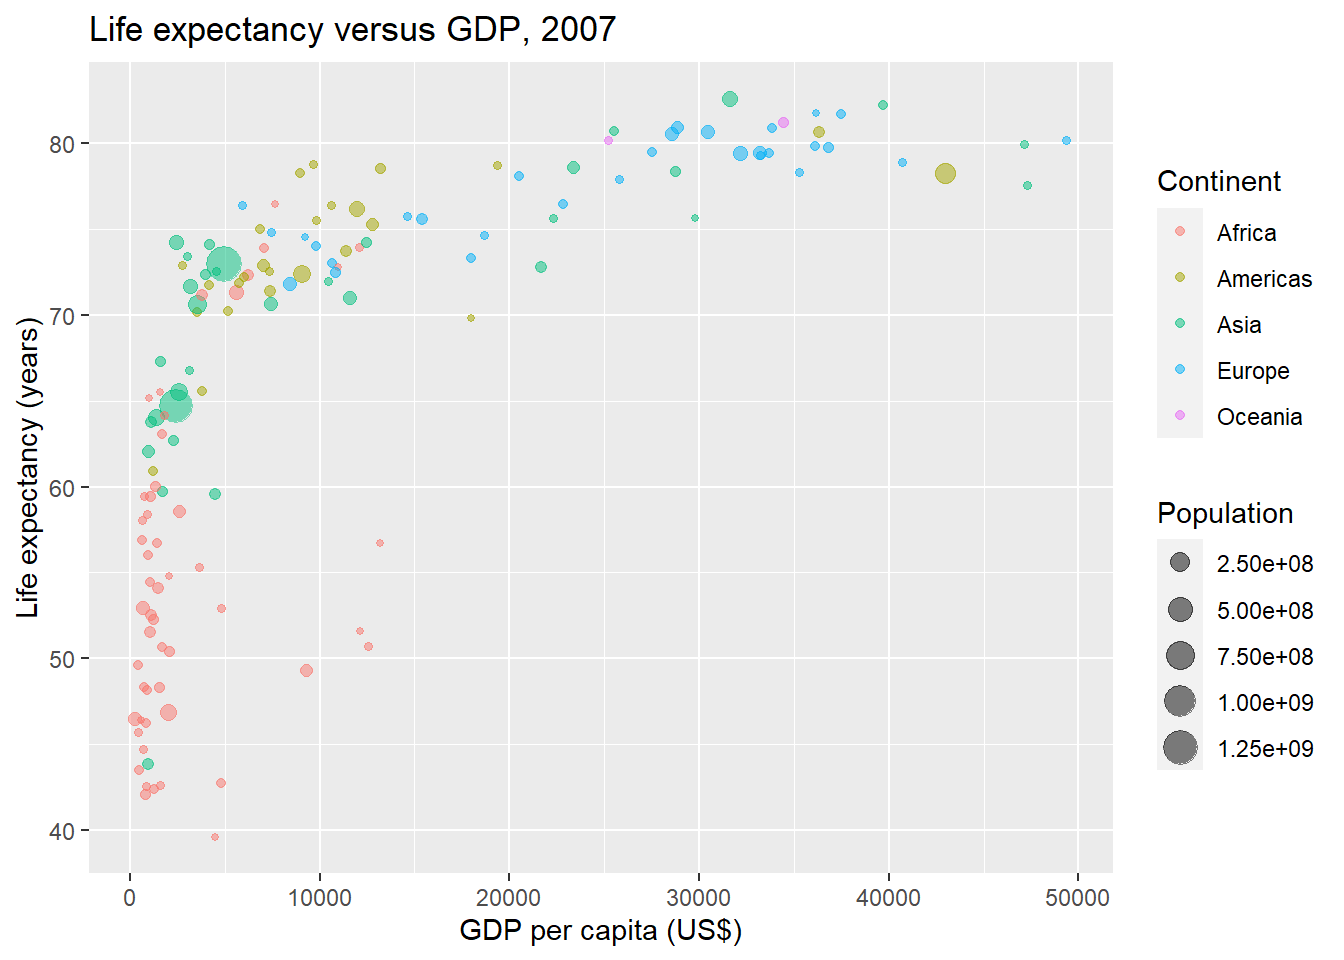 Life expectancy versus GDP per capita in 2007 created with **ggplot2**.